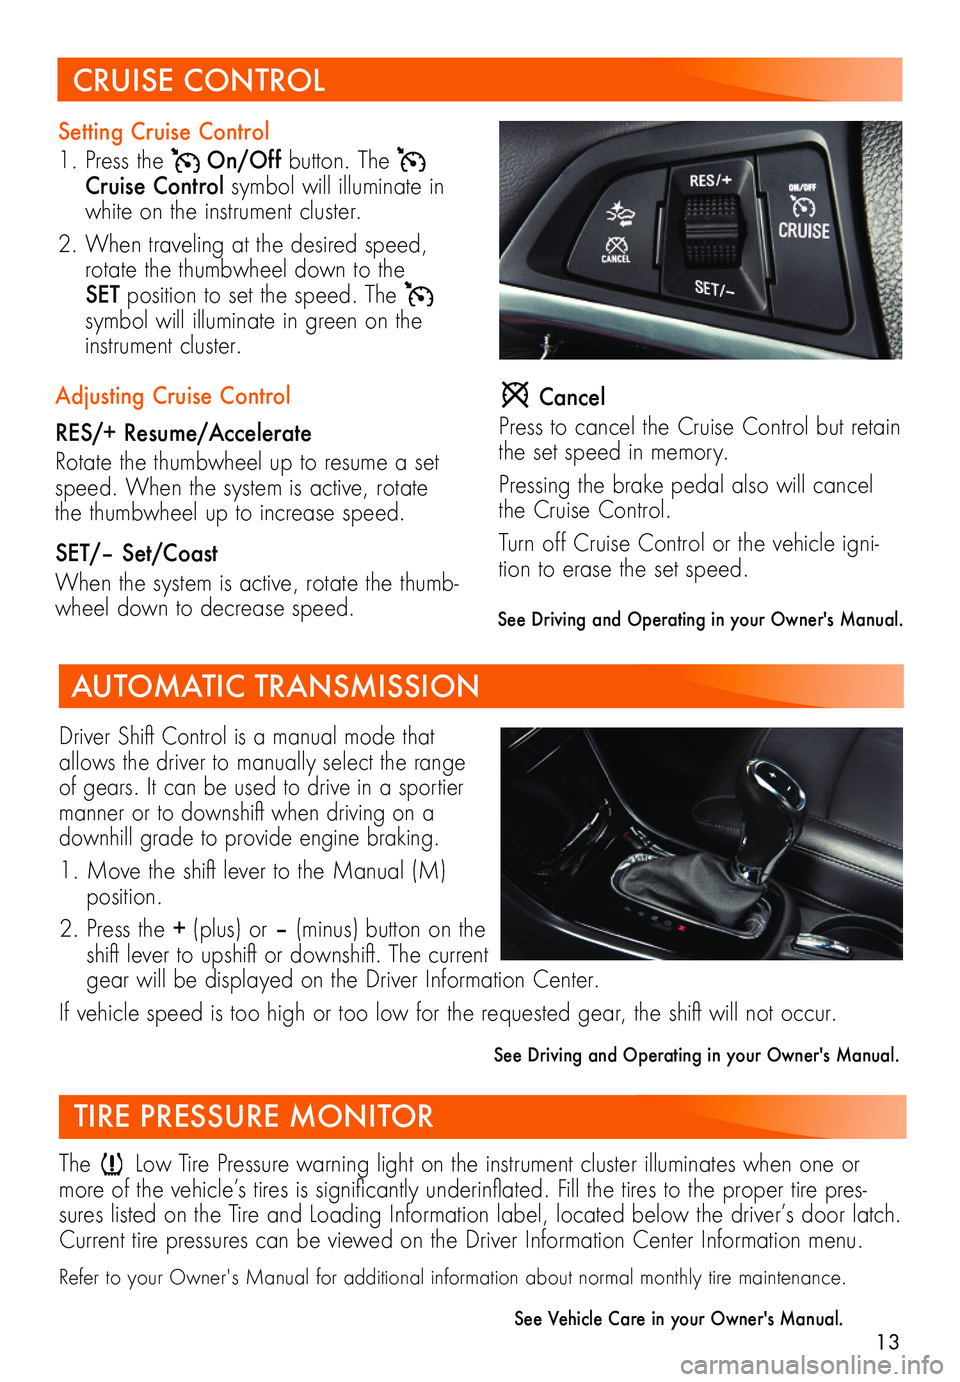 BUICK ENCORE 2020  Get To Know Guide 13
Driver	Shift	Control	 is	a	manual	 mode	that	allows the driver to manually select the range of gears. It can be used to drive in a sportier manner	 or	to	downshift	 when	driving	 on	a	downhill grad